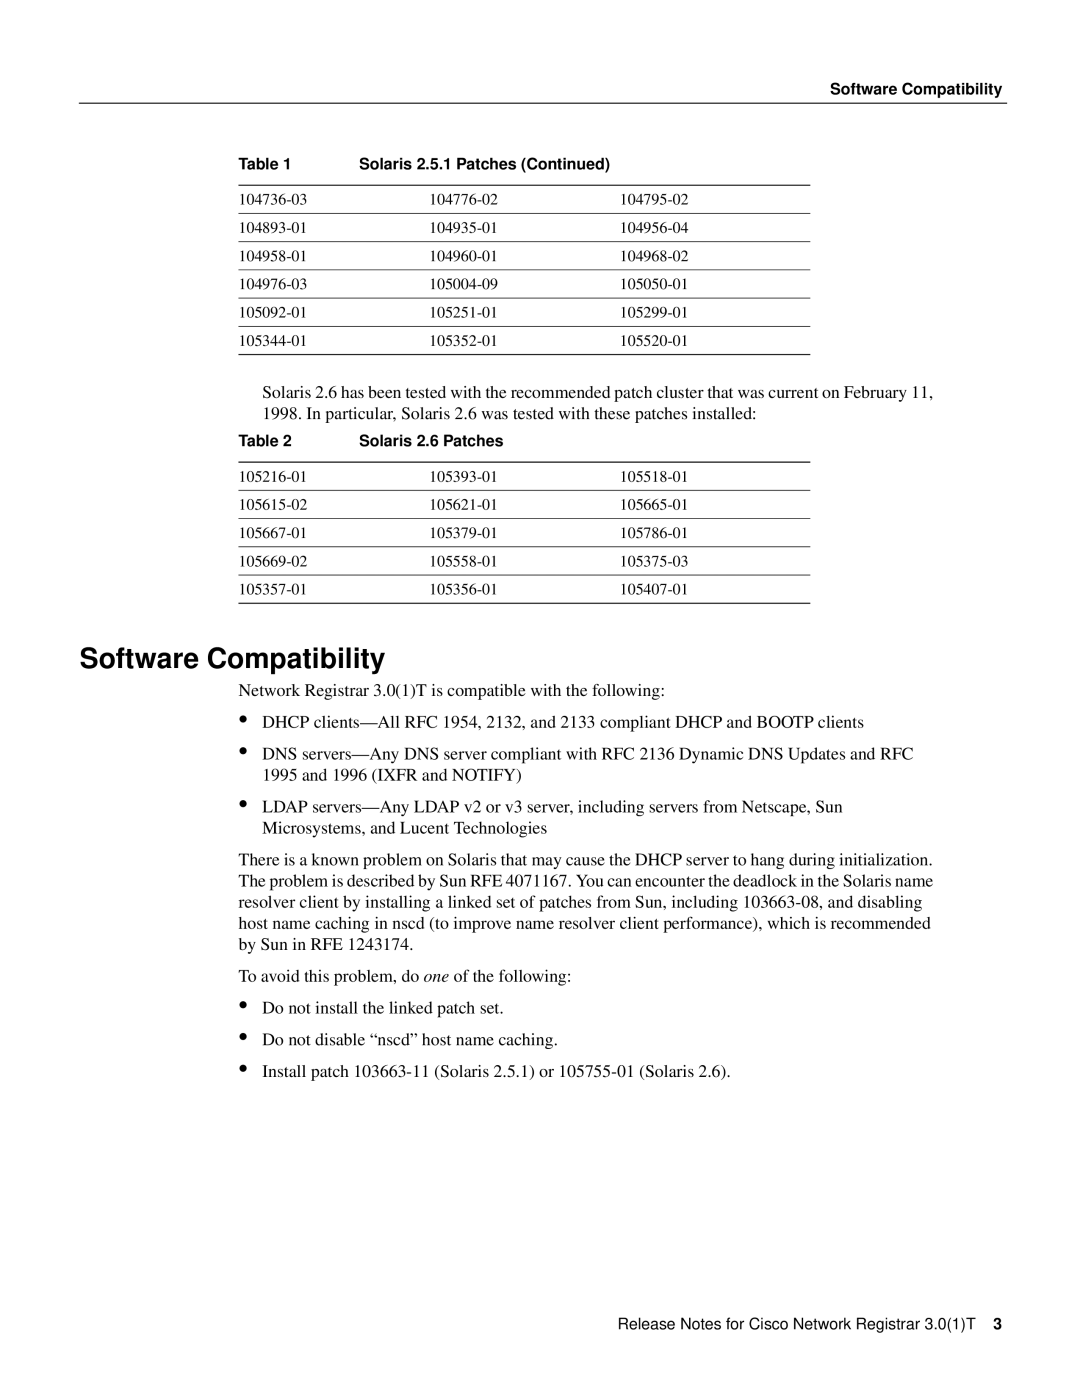 Cisco Systems 3.0(1) manual Software Compatibility 